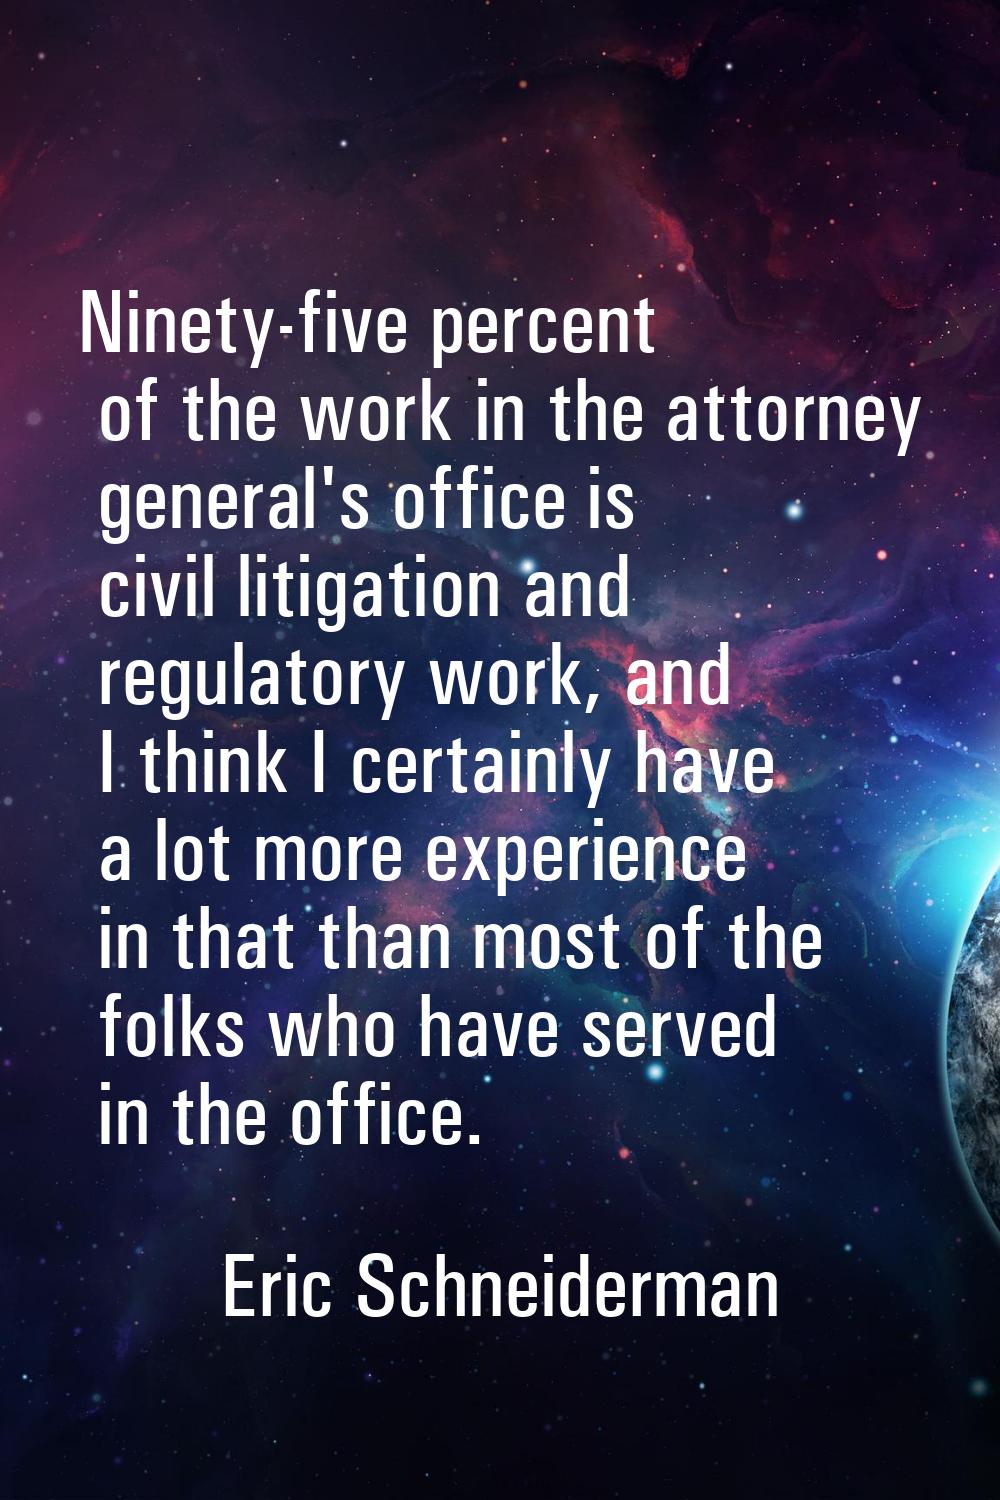 Ninety-five percent of the work in the attorney general's office is civil litigation and regulatory